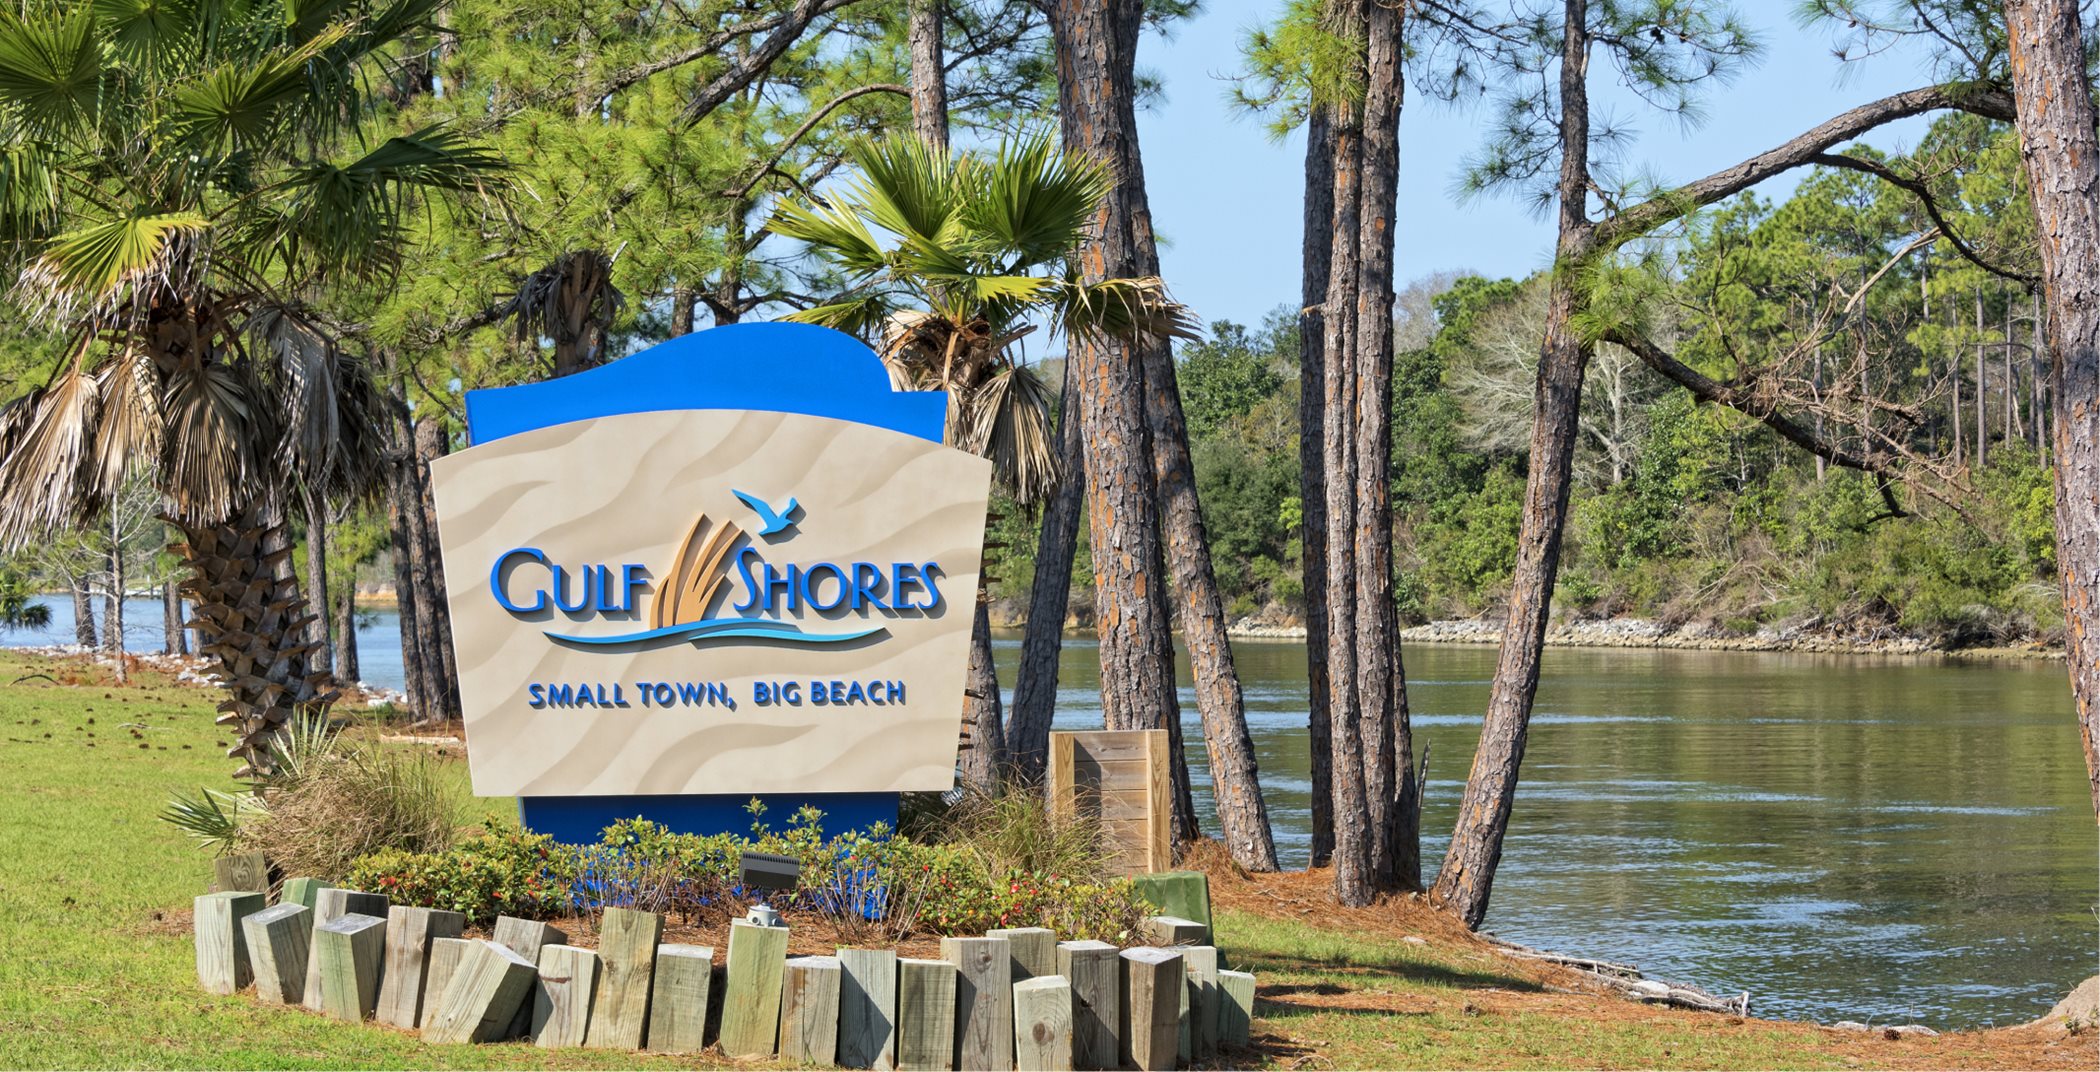 Gulf Shores welcome sign